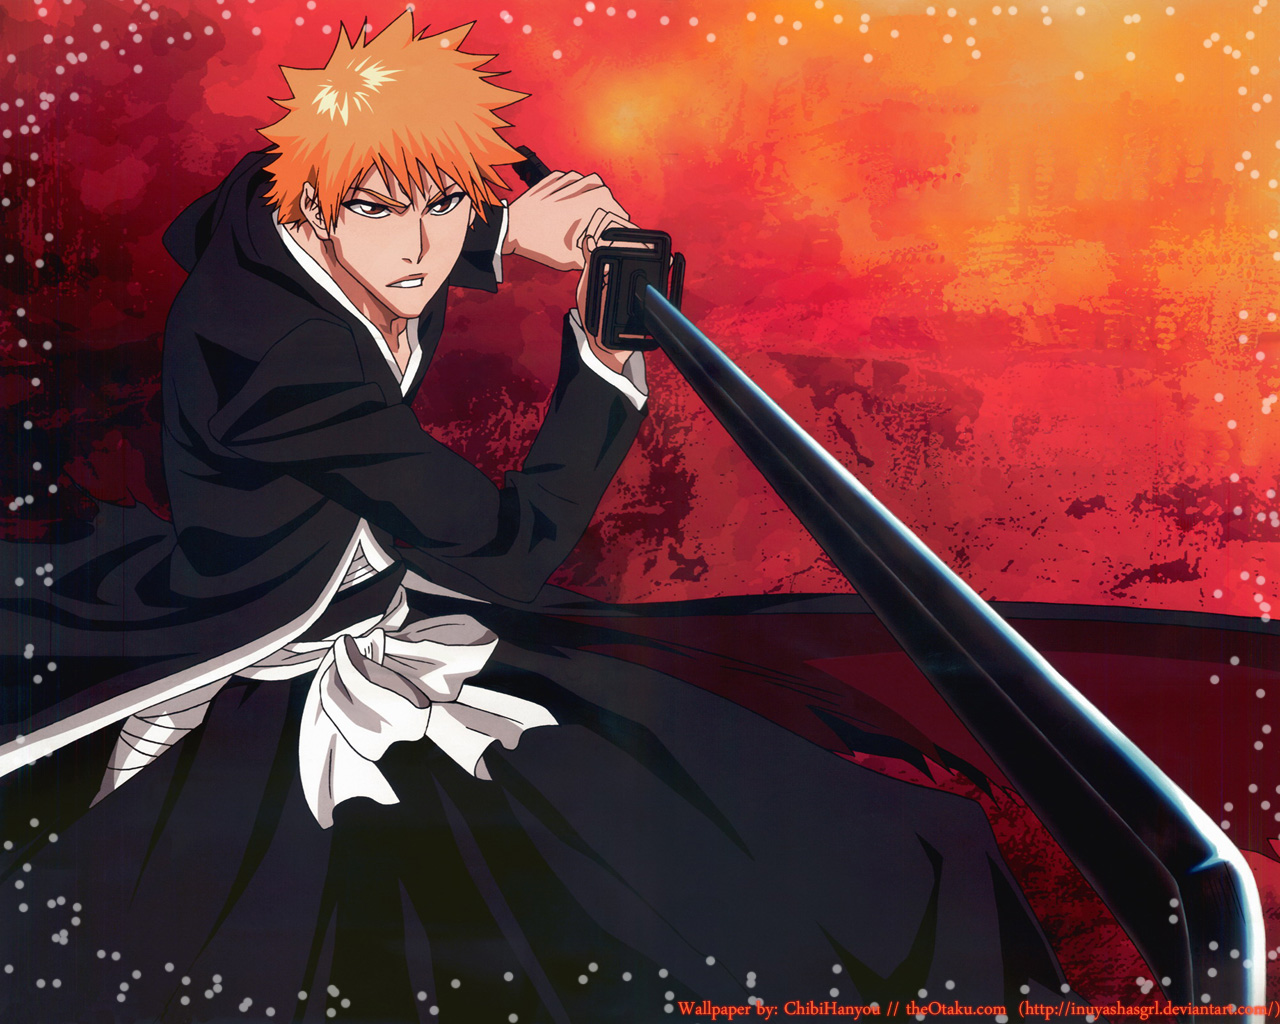 Anime Bleach Picture - Image Abyss